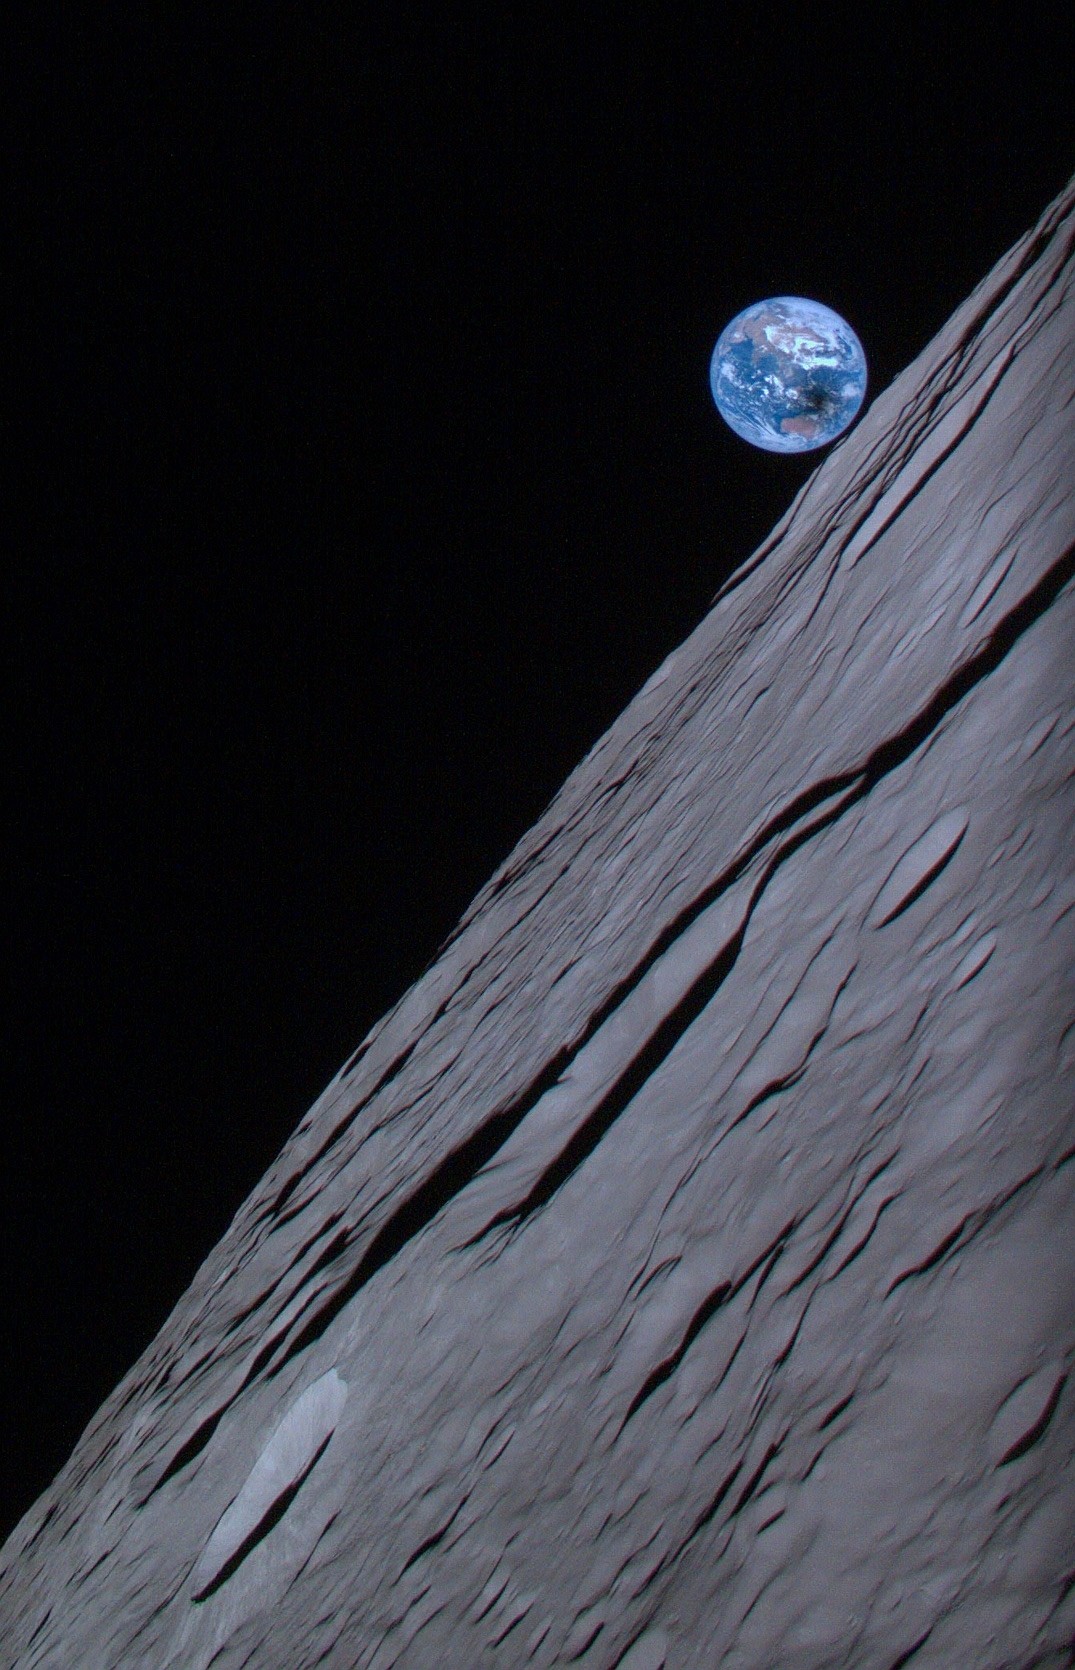 The Earth Beyond the Moon from Hakuto-R